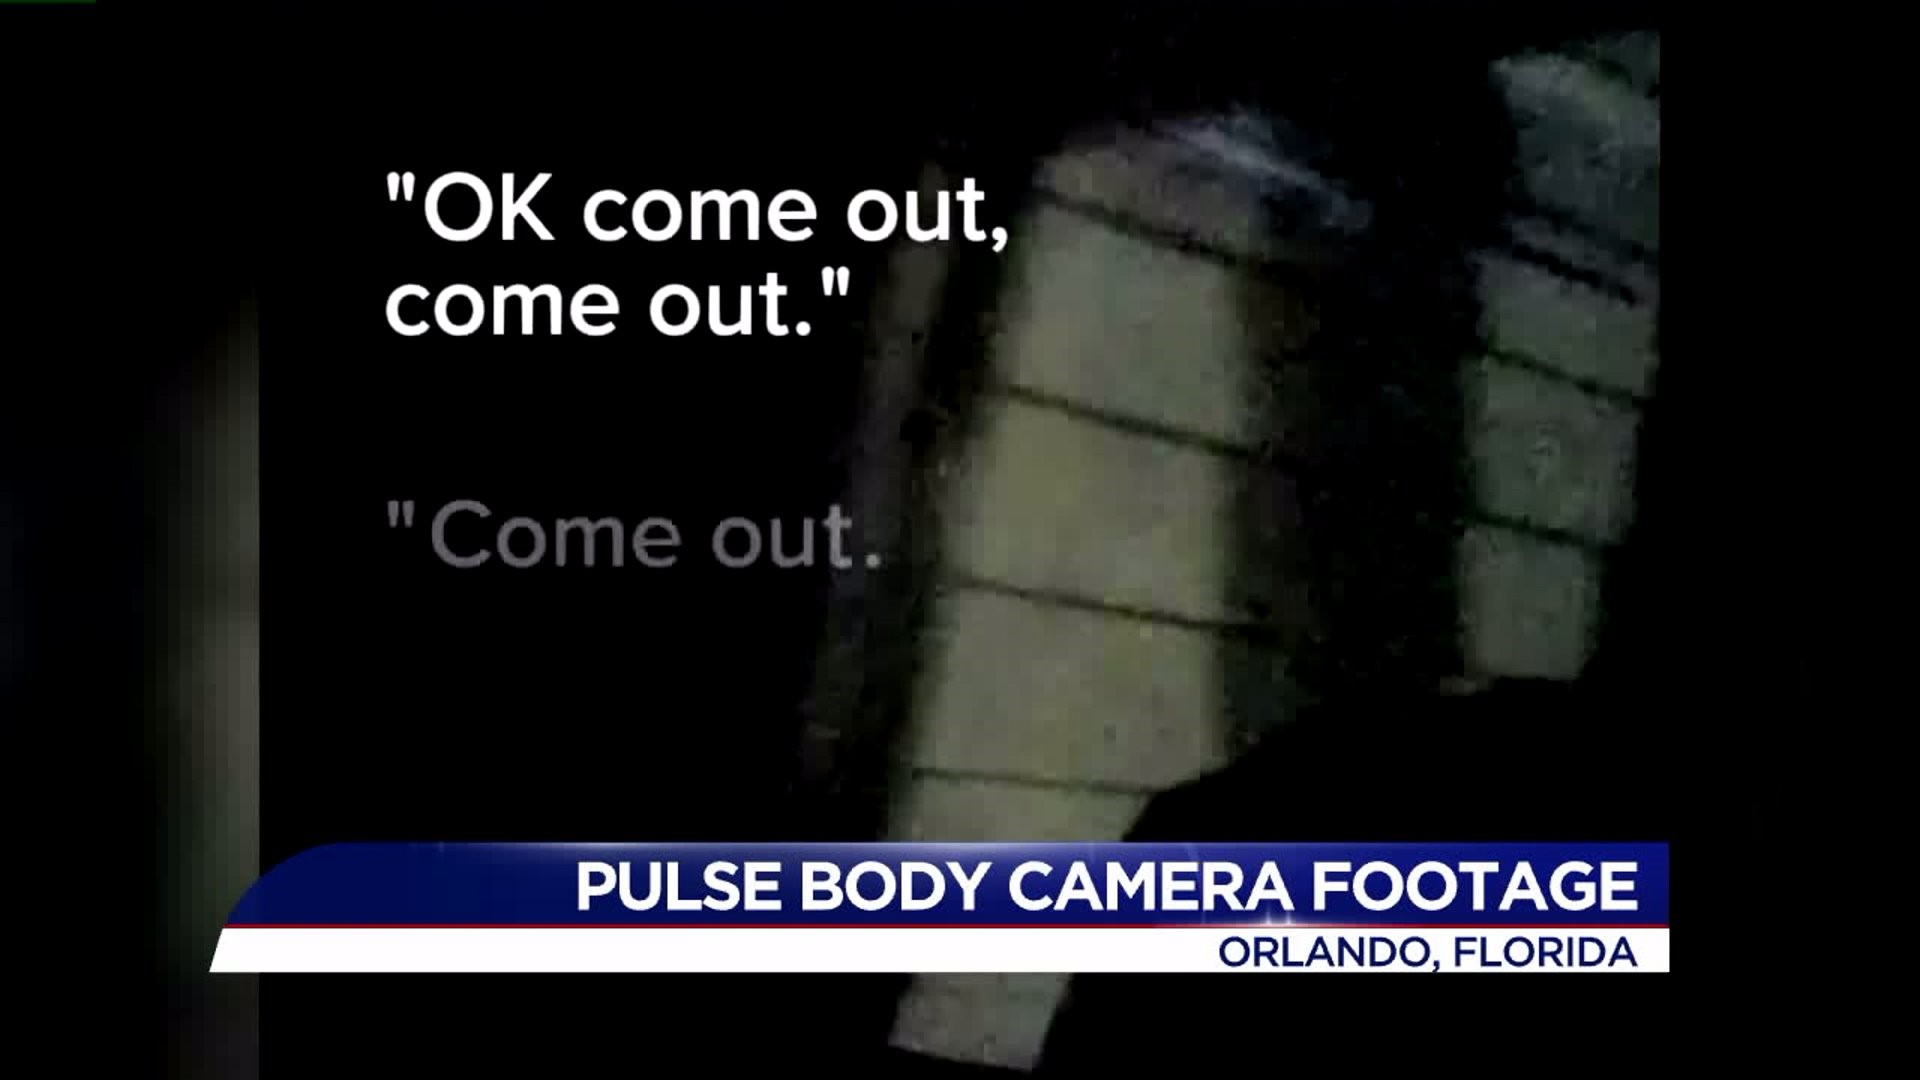 body cam footage from Pulse released